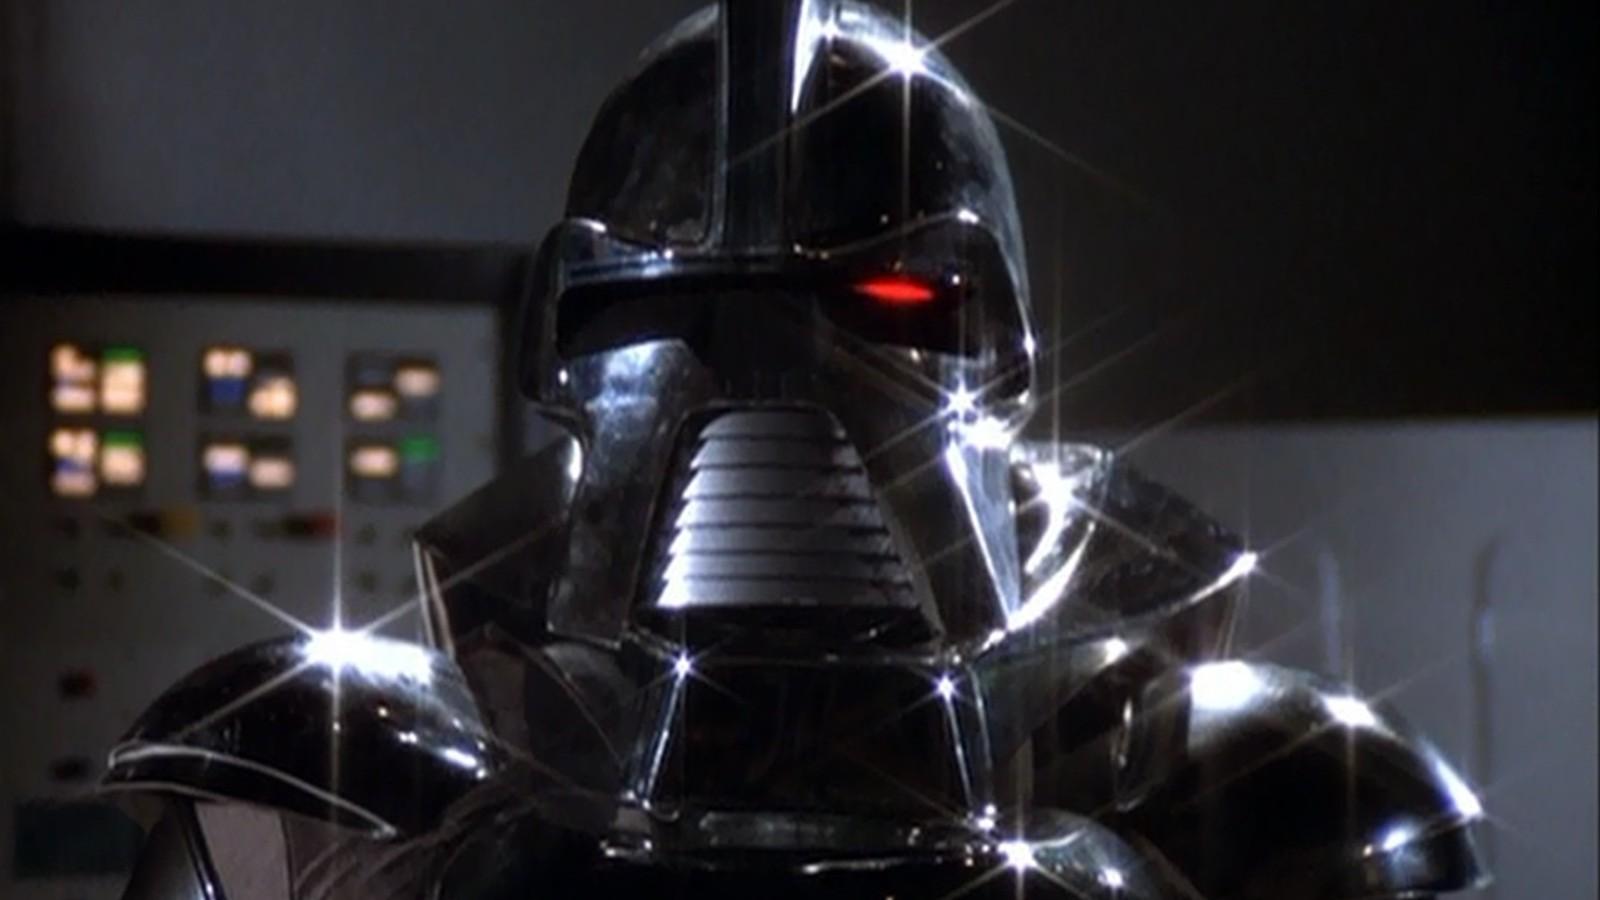 Mr. Robot creator Sam Esmail is rebooting Battlestar Galactica for NBCU's  new streaming service